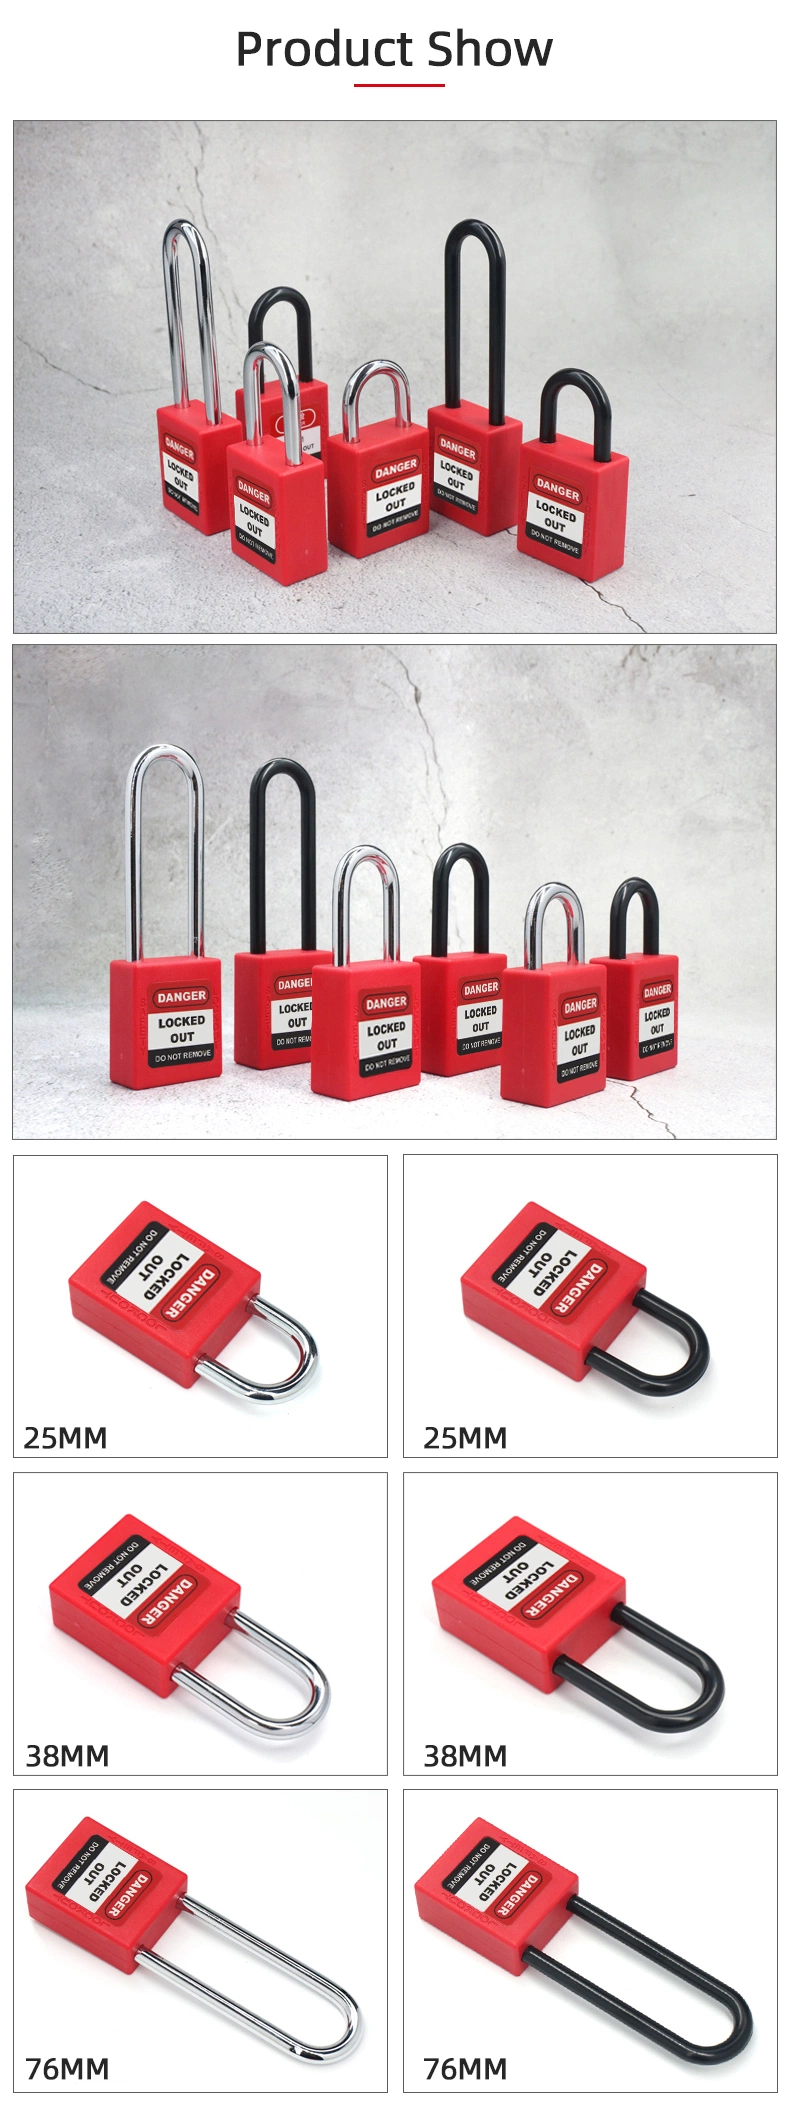 38mm Stainless Steel Shackle Safety Shackle Industrial Safe Padlock with Key